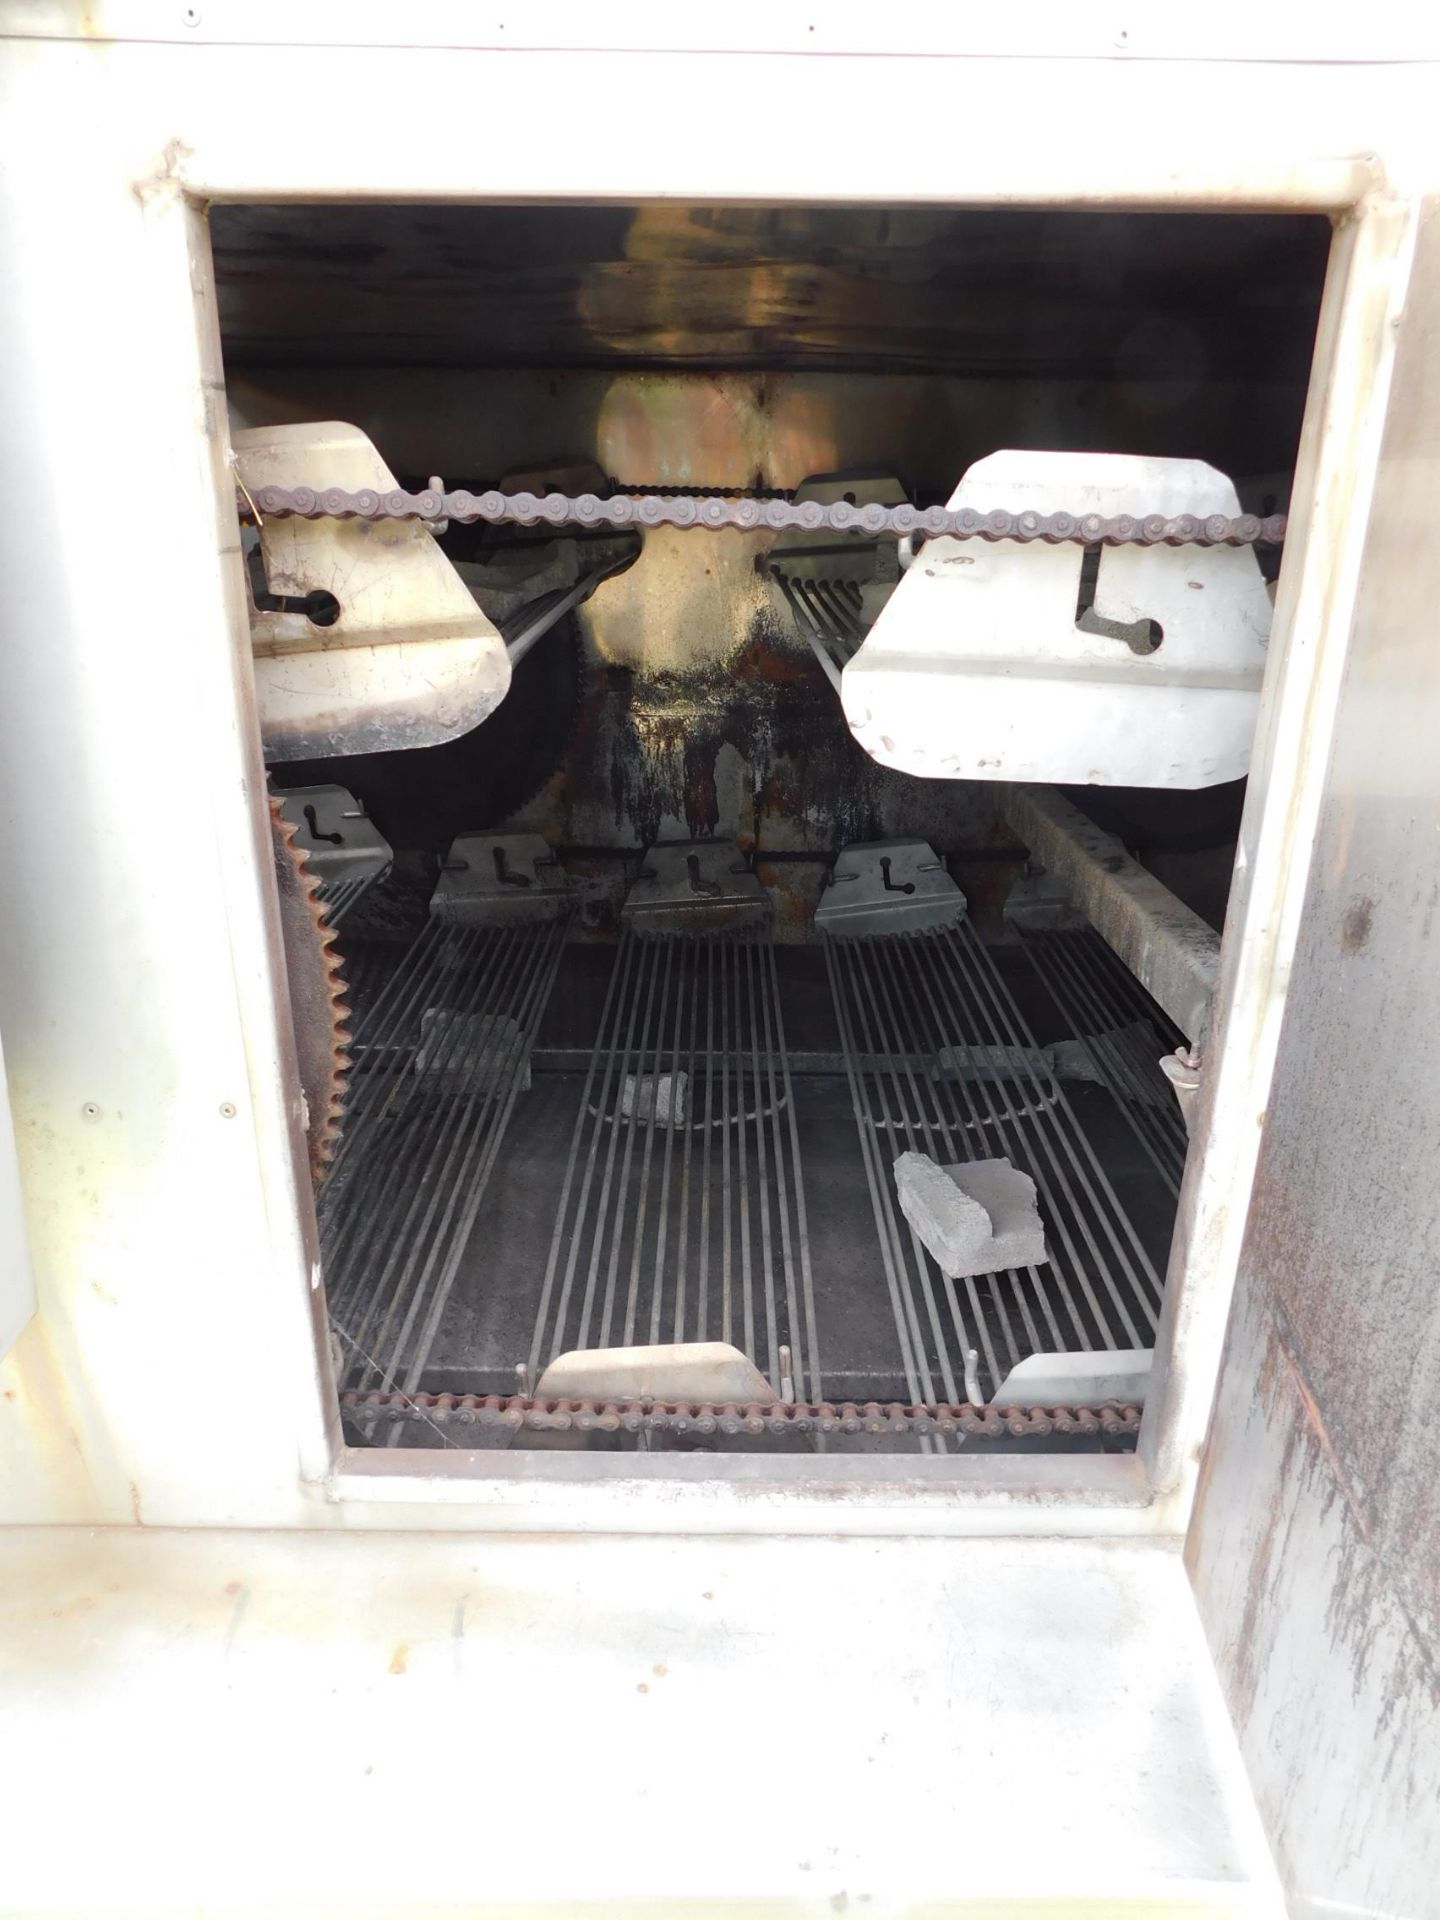 Holstein Maxi Model 400 Chicken, Rib,Beef Cooker Trailed Mounted 24 Removable Racks, Double walled - Image 31 of 49